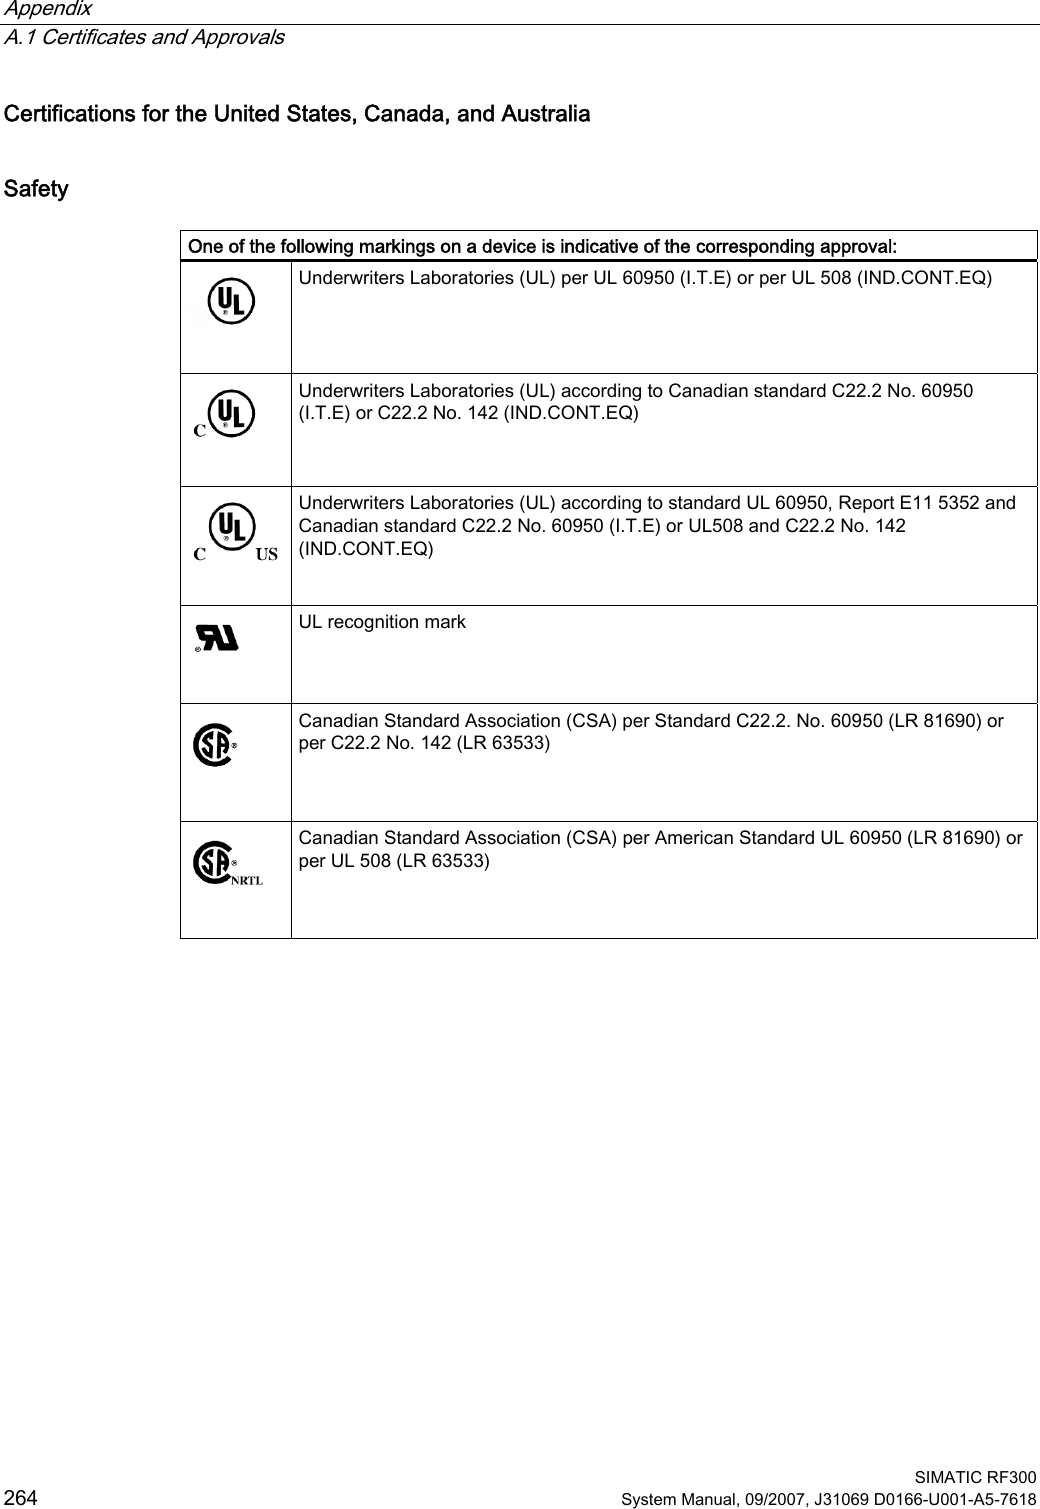 Appendix   A.1 Certificates and Approvals  SIMATIC RF300 264 System Manual, 09/2007, J31069 D0166-U001-A5-7618 Certifications for the United States, Canada, and Australia Safety   One of the following markings on a device is indicative of the corresponding approval:   Underwriters Laboratories (UL) per UL 60950 (I.T.E) or per UL 508 (IND.CONT.EQ)   Underwriters Laboratories (UL) according to Canadian standard C22.2 No. 60950 (I.T.E) or C22.2 No. 142 (IND.CONT.EQ)  Underwriters Laboratories (UL) according to standard UL 60950, Report E11 5352 and Canadian standard C22.2 No. 60950 (I.T.E) or UL508 and C22.2 No. 142 (IND.CONT.EQ)   UL recognition mark   Canadian Standard Association (CSA) per Standard C22.2. No. 60950 (LR 81690) or per C22.2 No. 142 (LR 63533)   Canadian Standard Association (CSA) per American Standard UL 60950 (LR 81690) or per UL 508 (LR 63533) 